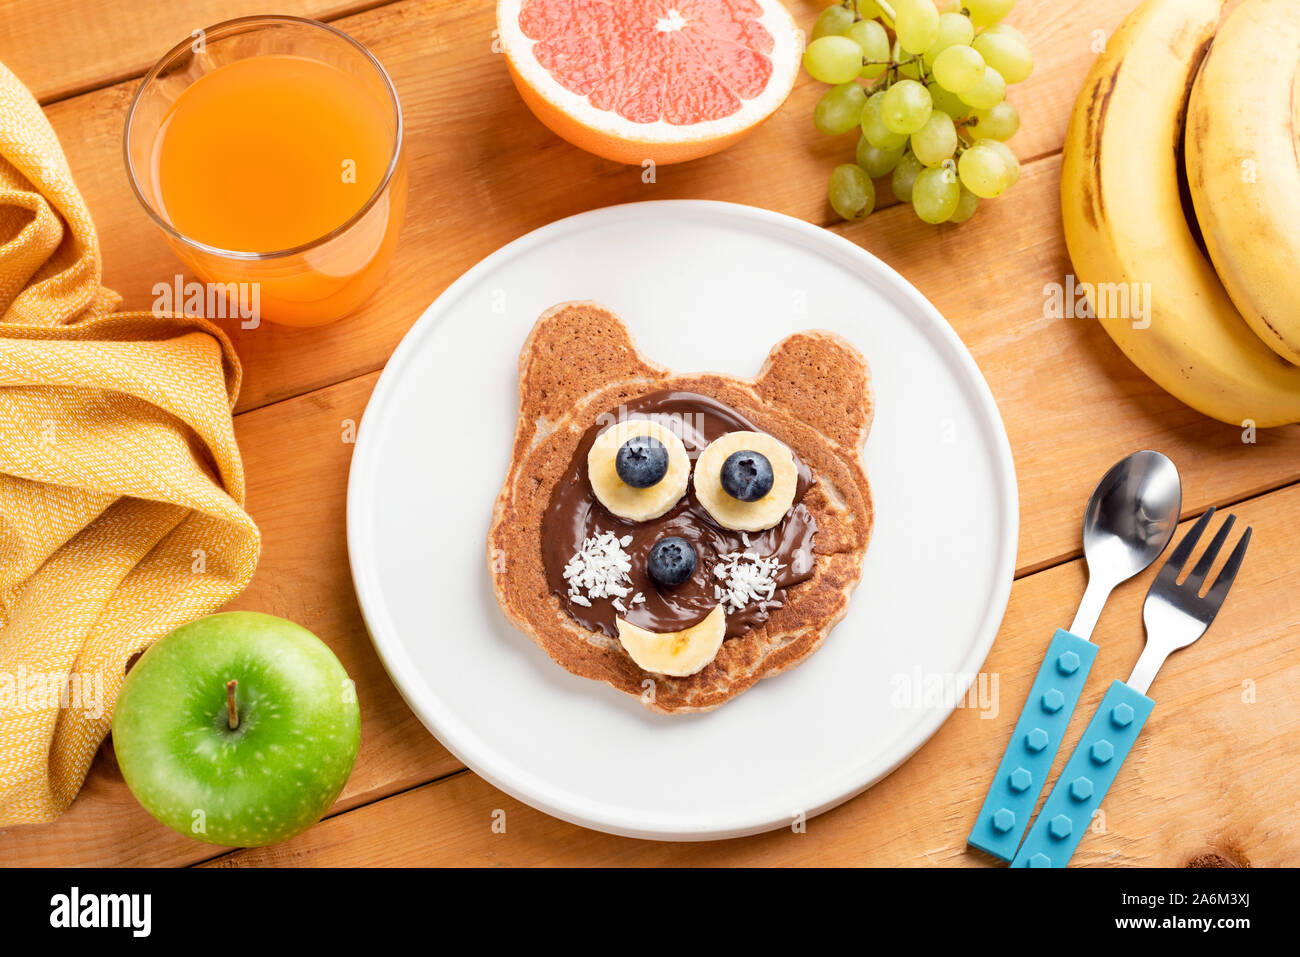 Funny breakfast pancake for kids. Food art. Childhood motherhood concept. Pancake with chocolate spread, banana and blueberry shaped as cute funny ani Stock Photo